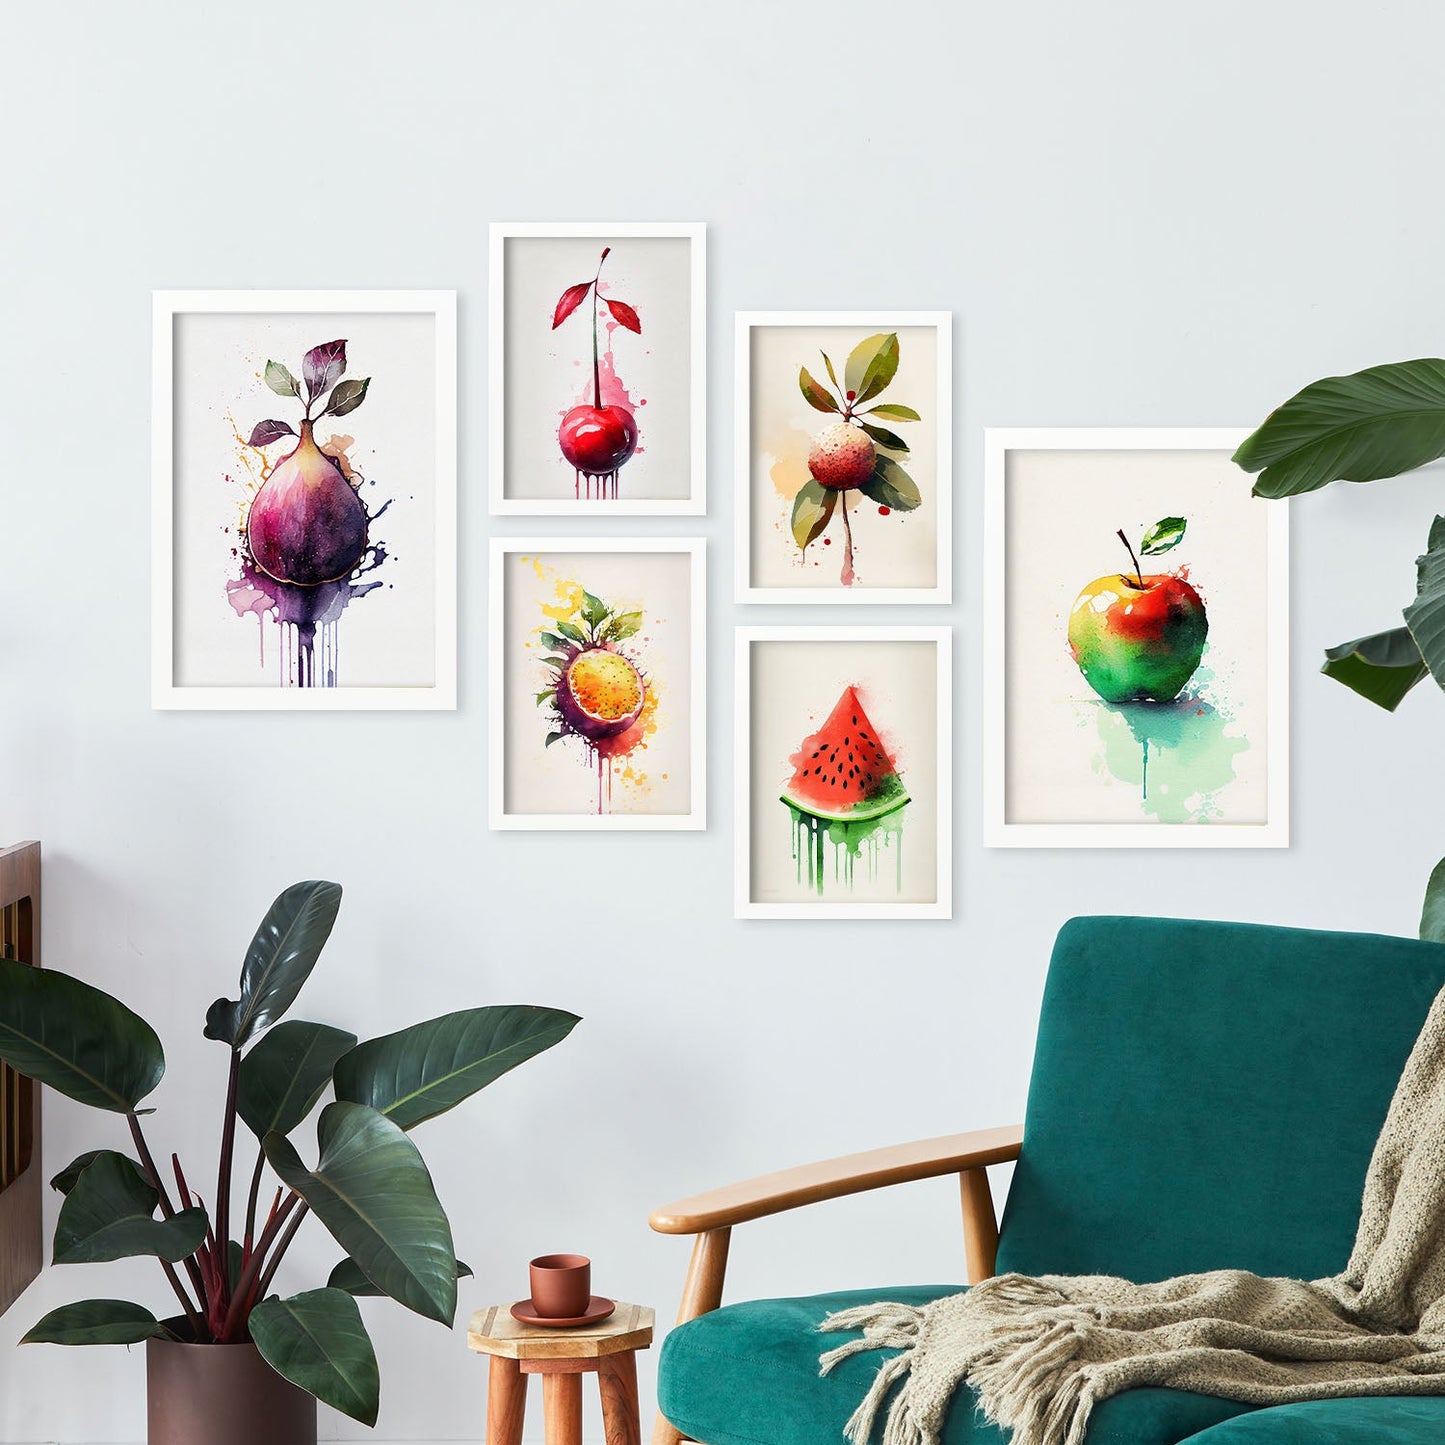 Nacnic Watercolor Fruits Set_05. Aesthetic Wall Art Prints for Bedroom or Living Room Design.